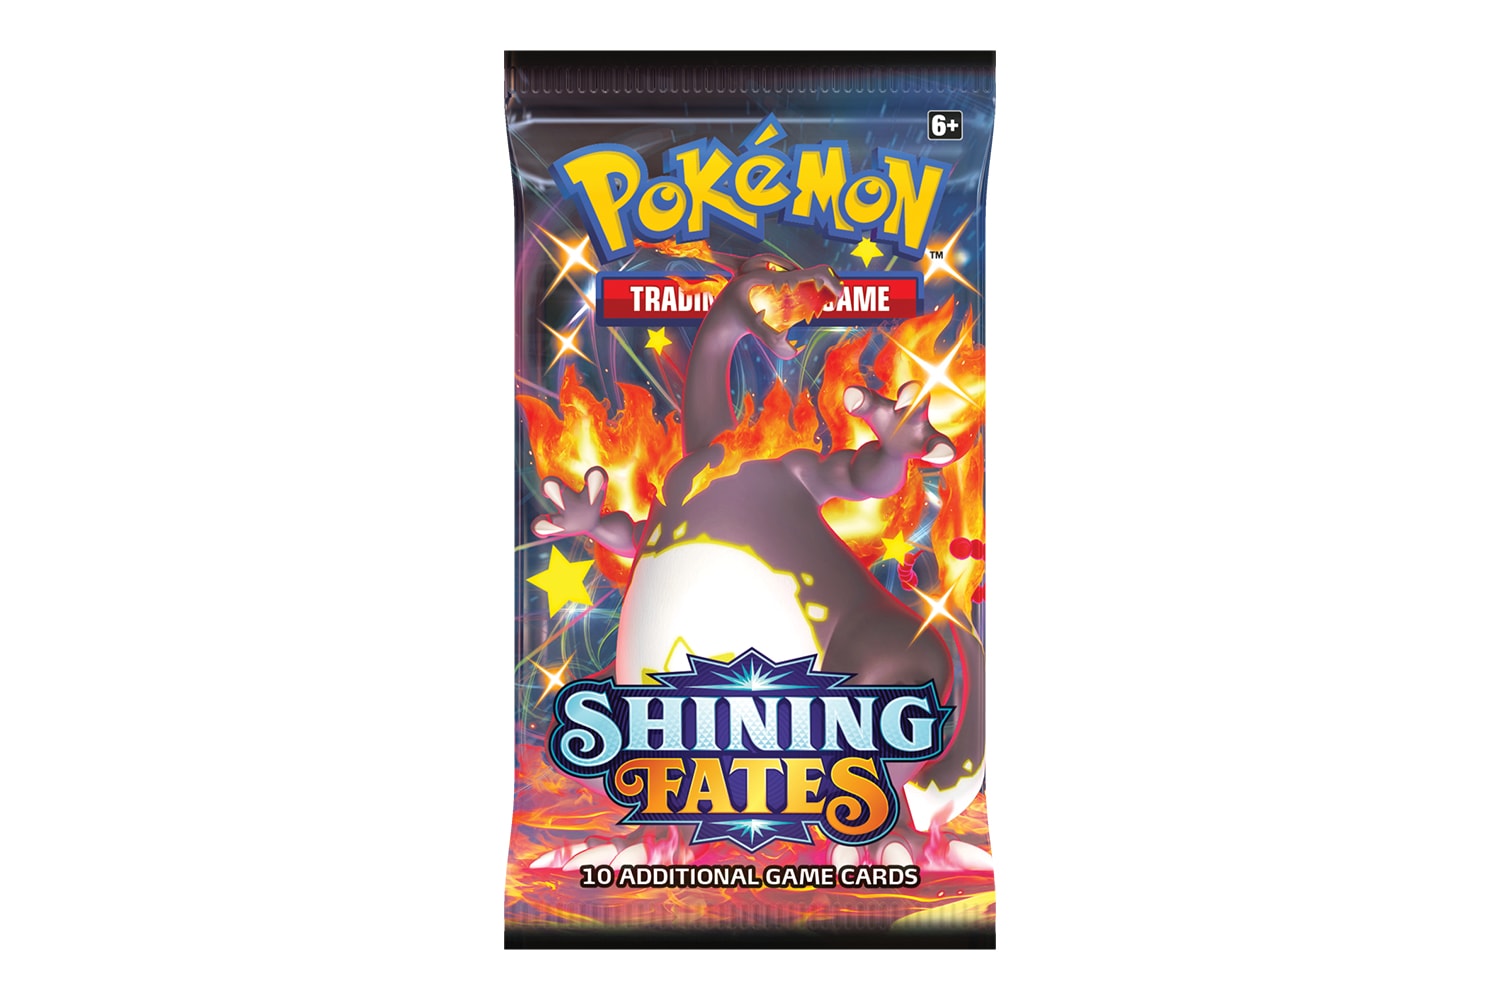 Pokémon TCG Shining Fates Expansion Now Available News Release Charizard Pikachu VMAX V Booters TCG Gaming Eevee ETB Elite trainer box 